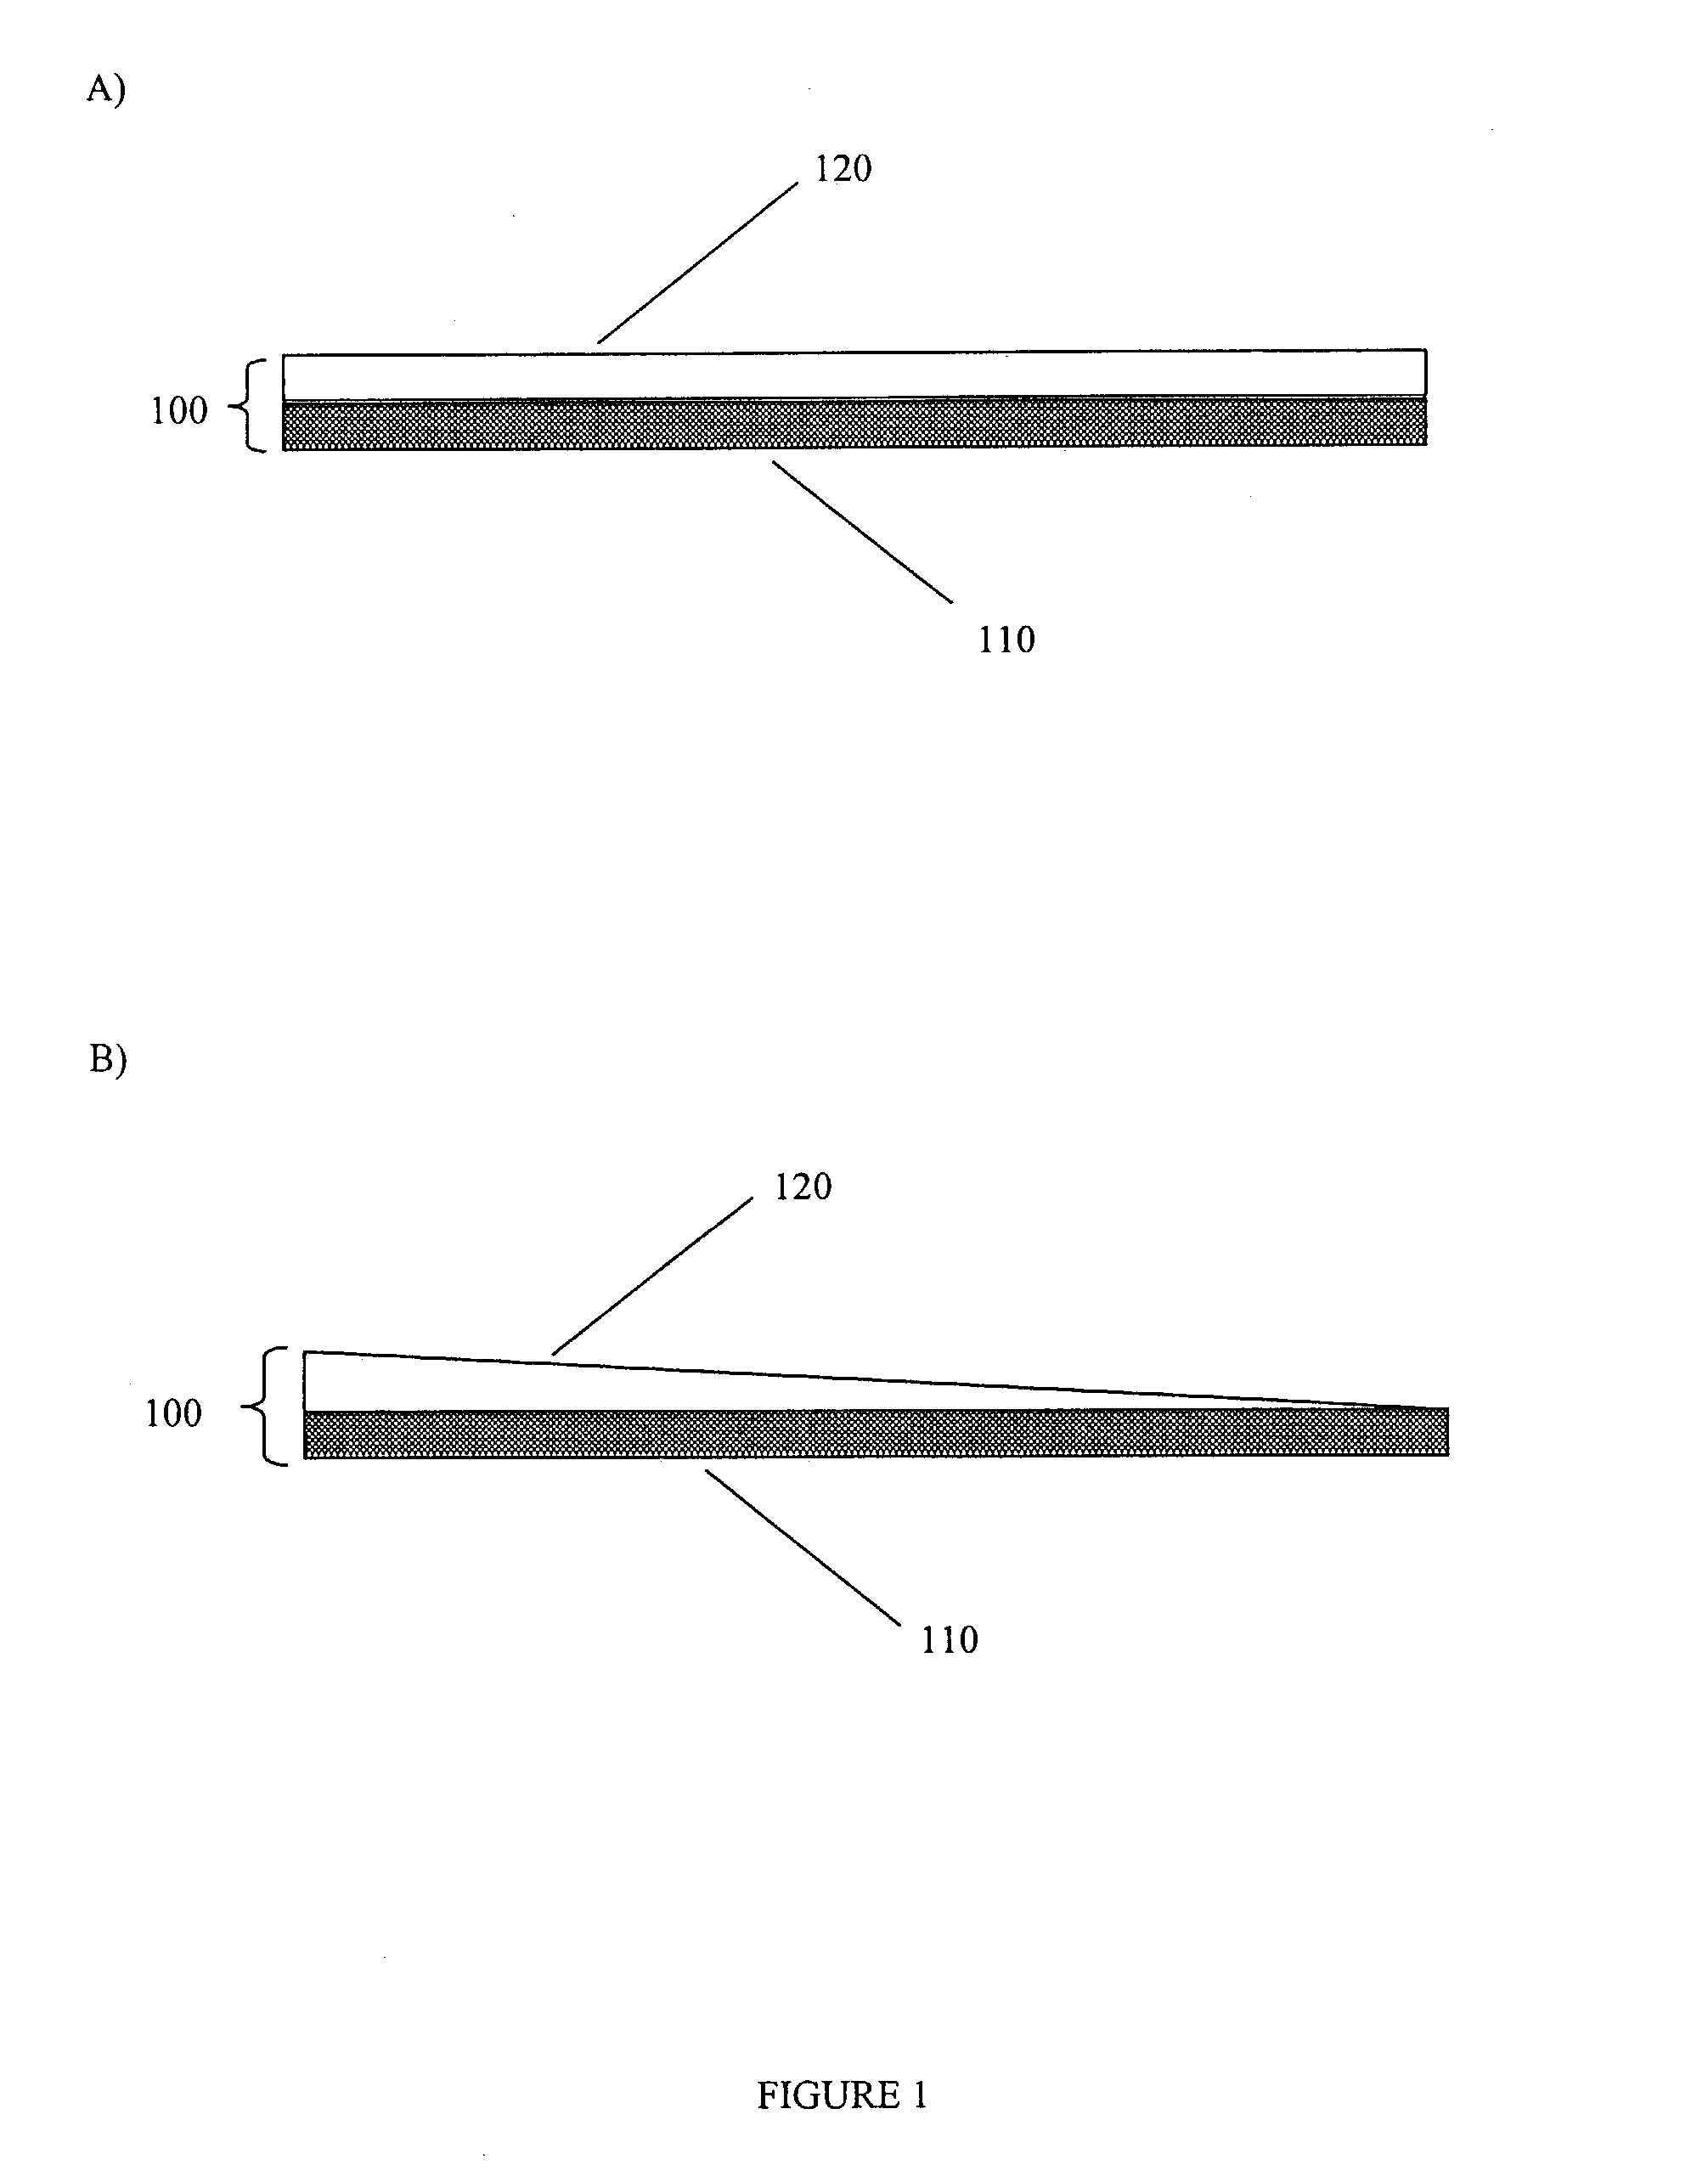 Patterned supports for testing, evaluating and calibrating detection devices